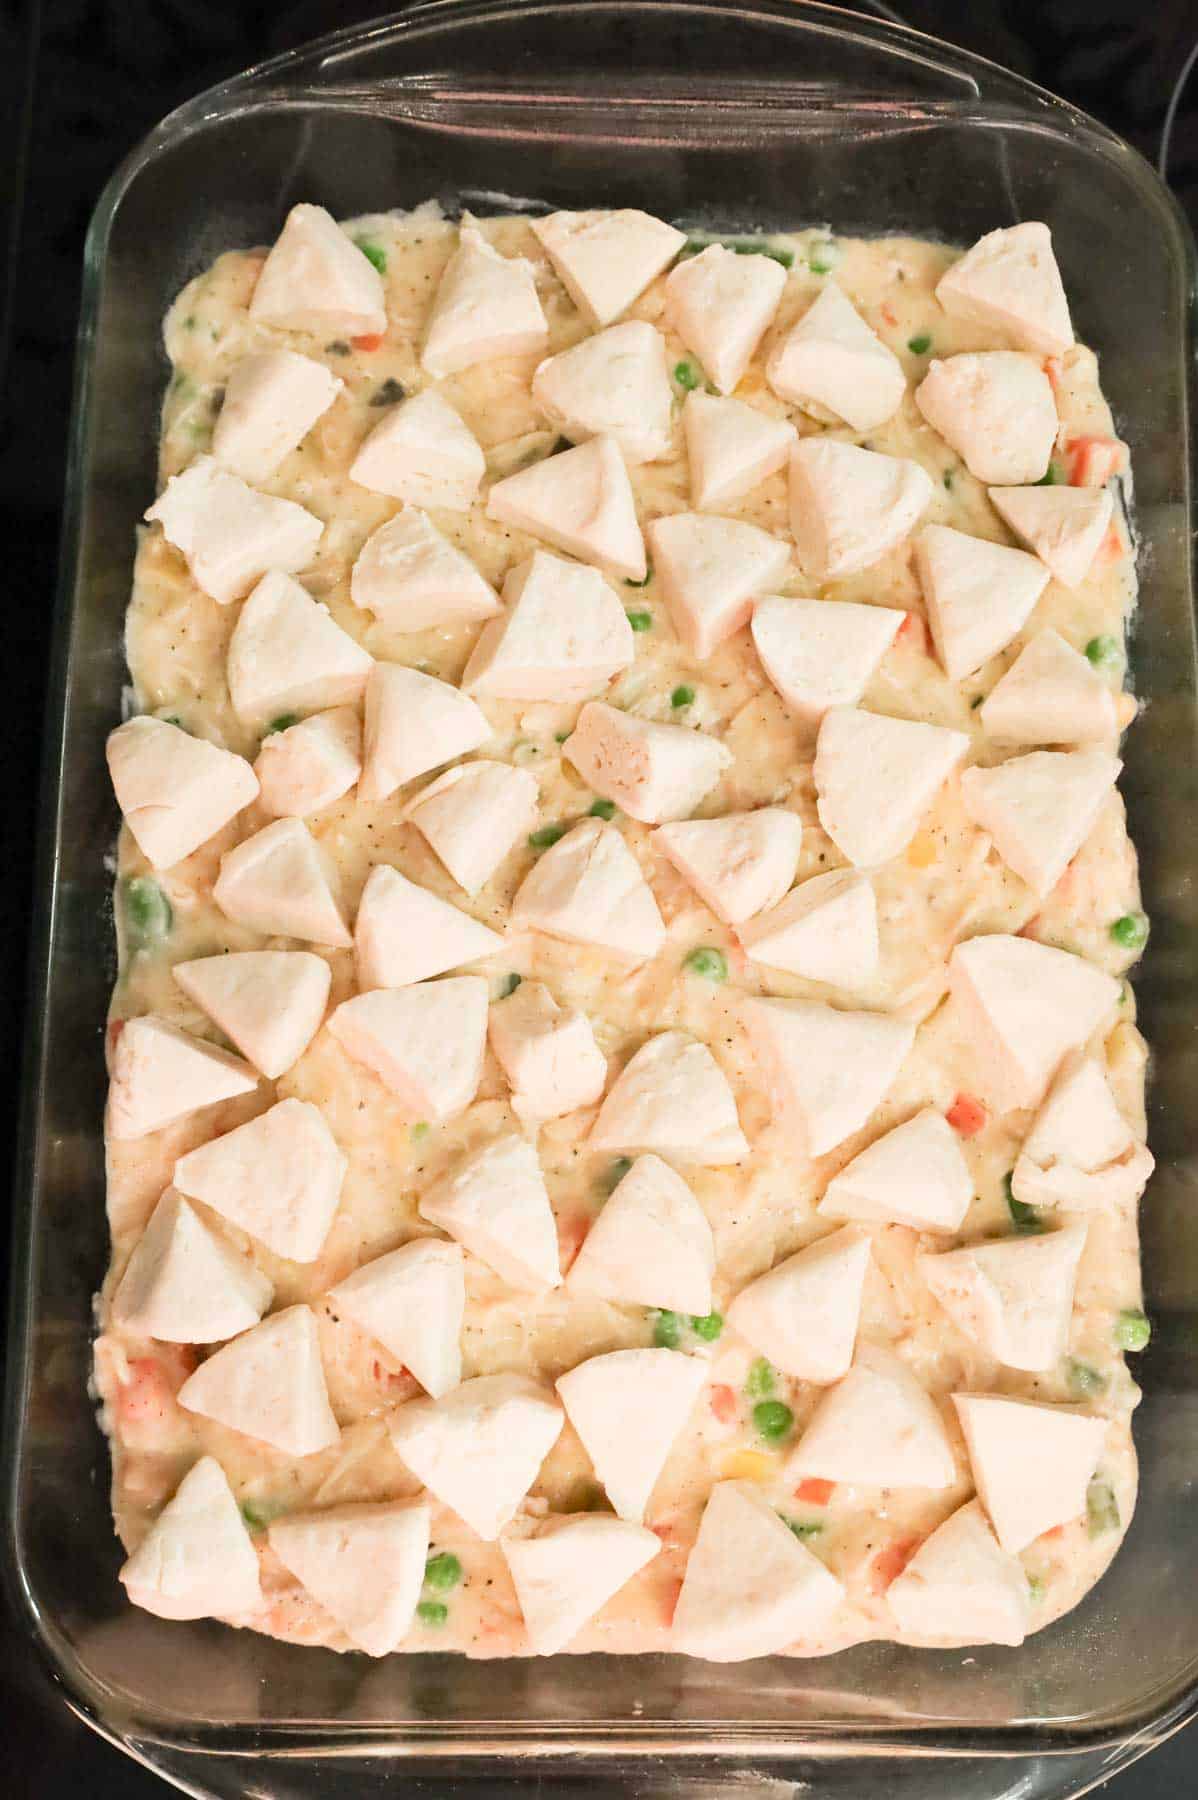 raw Pillsbury biscuit dough pieces on top of creamy chicken and vegetables mixture in a baking dish.